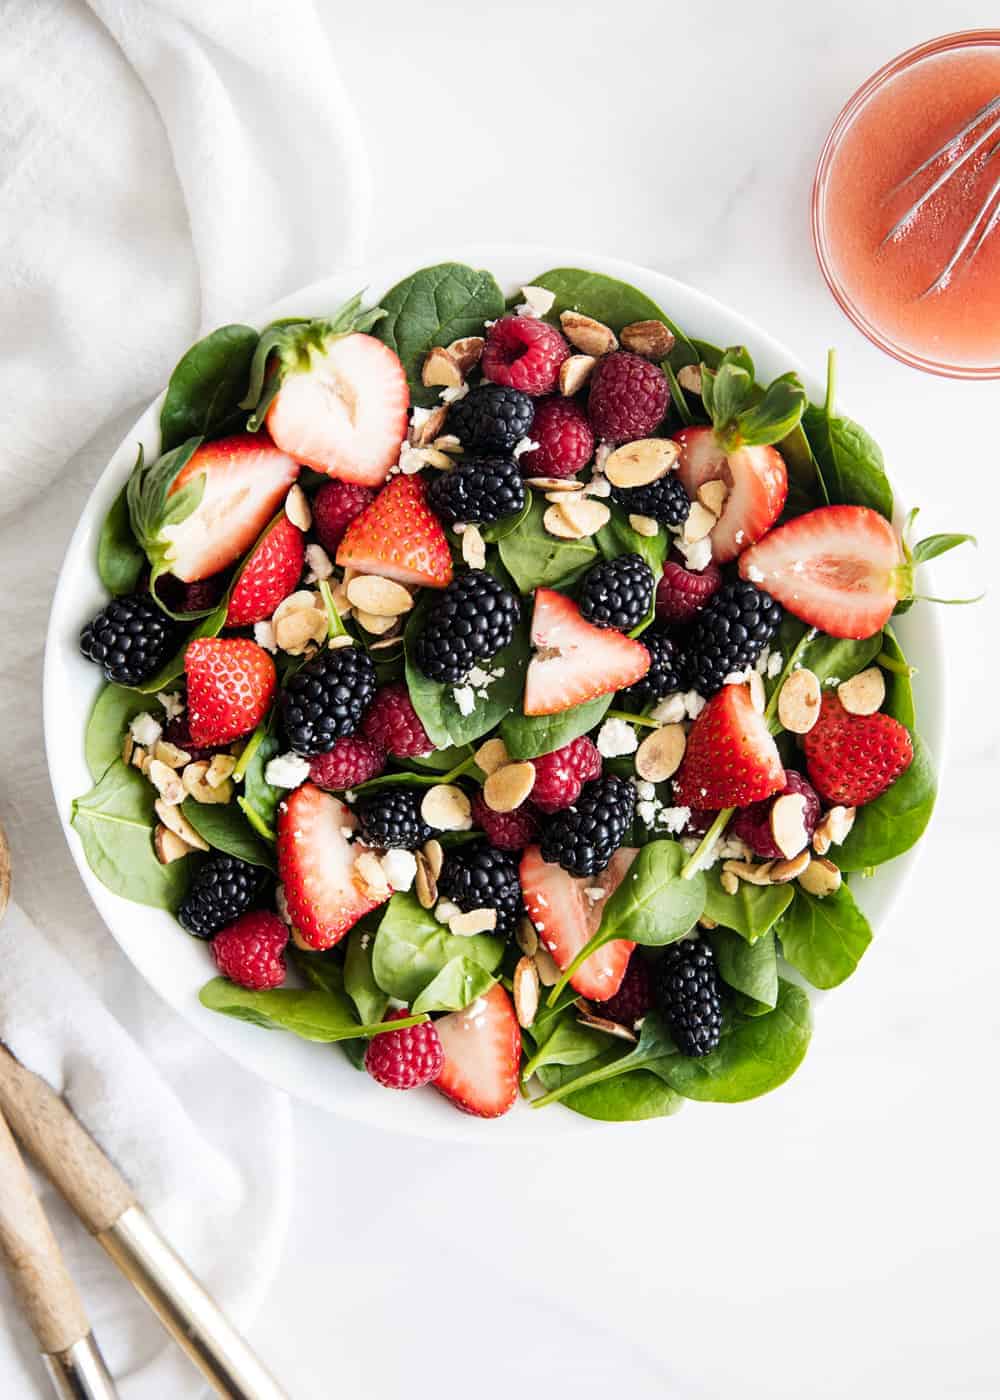 Spinach salad with berries.